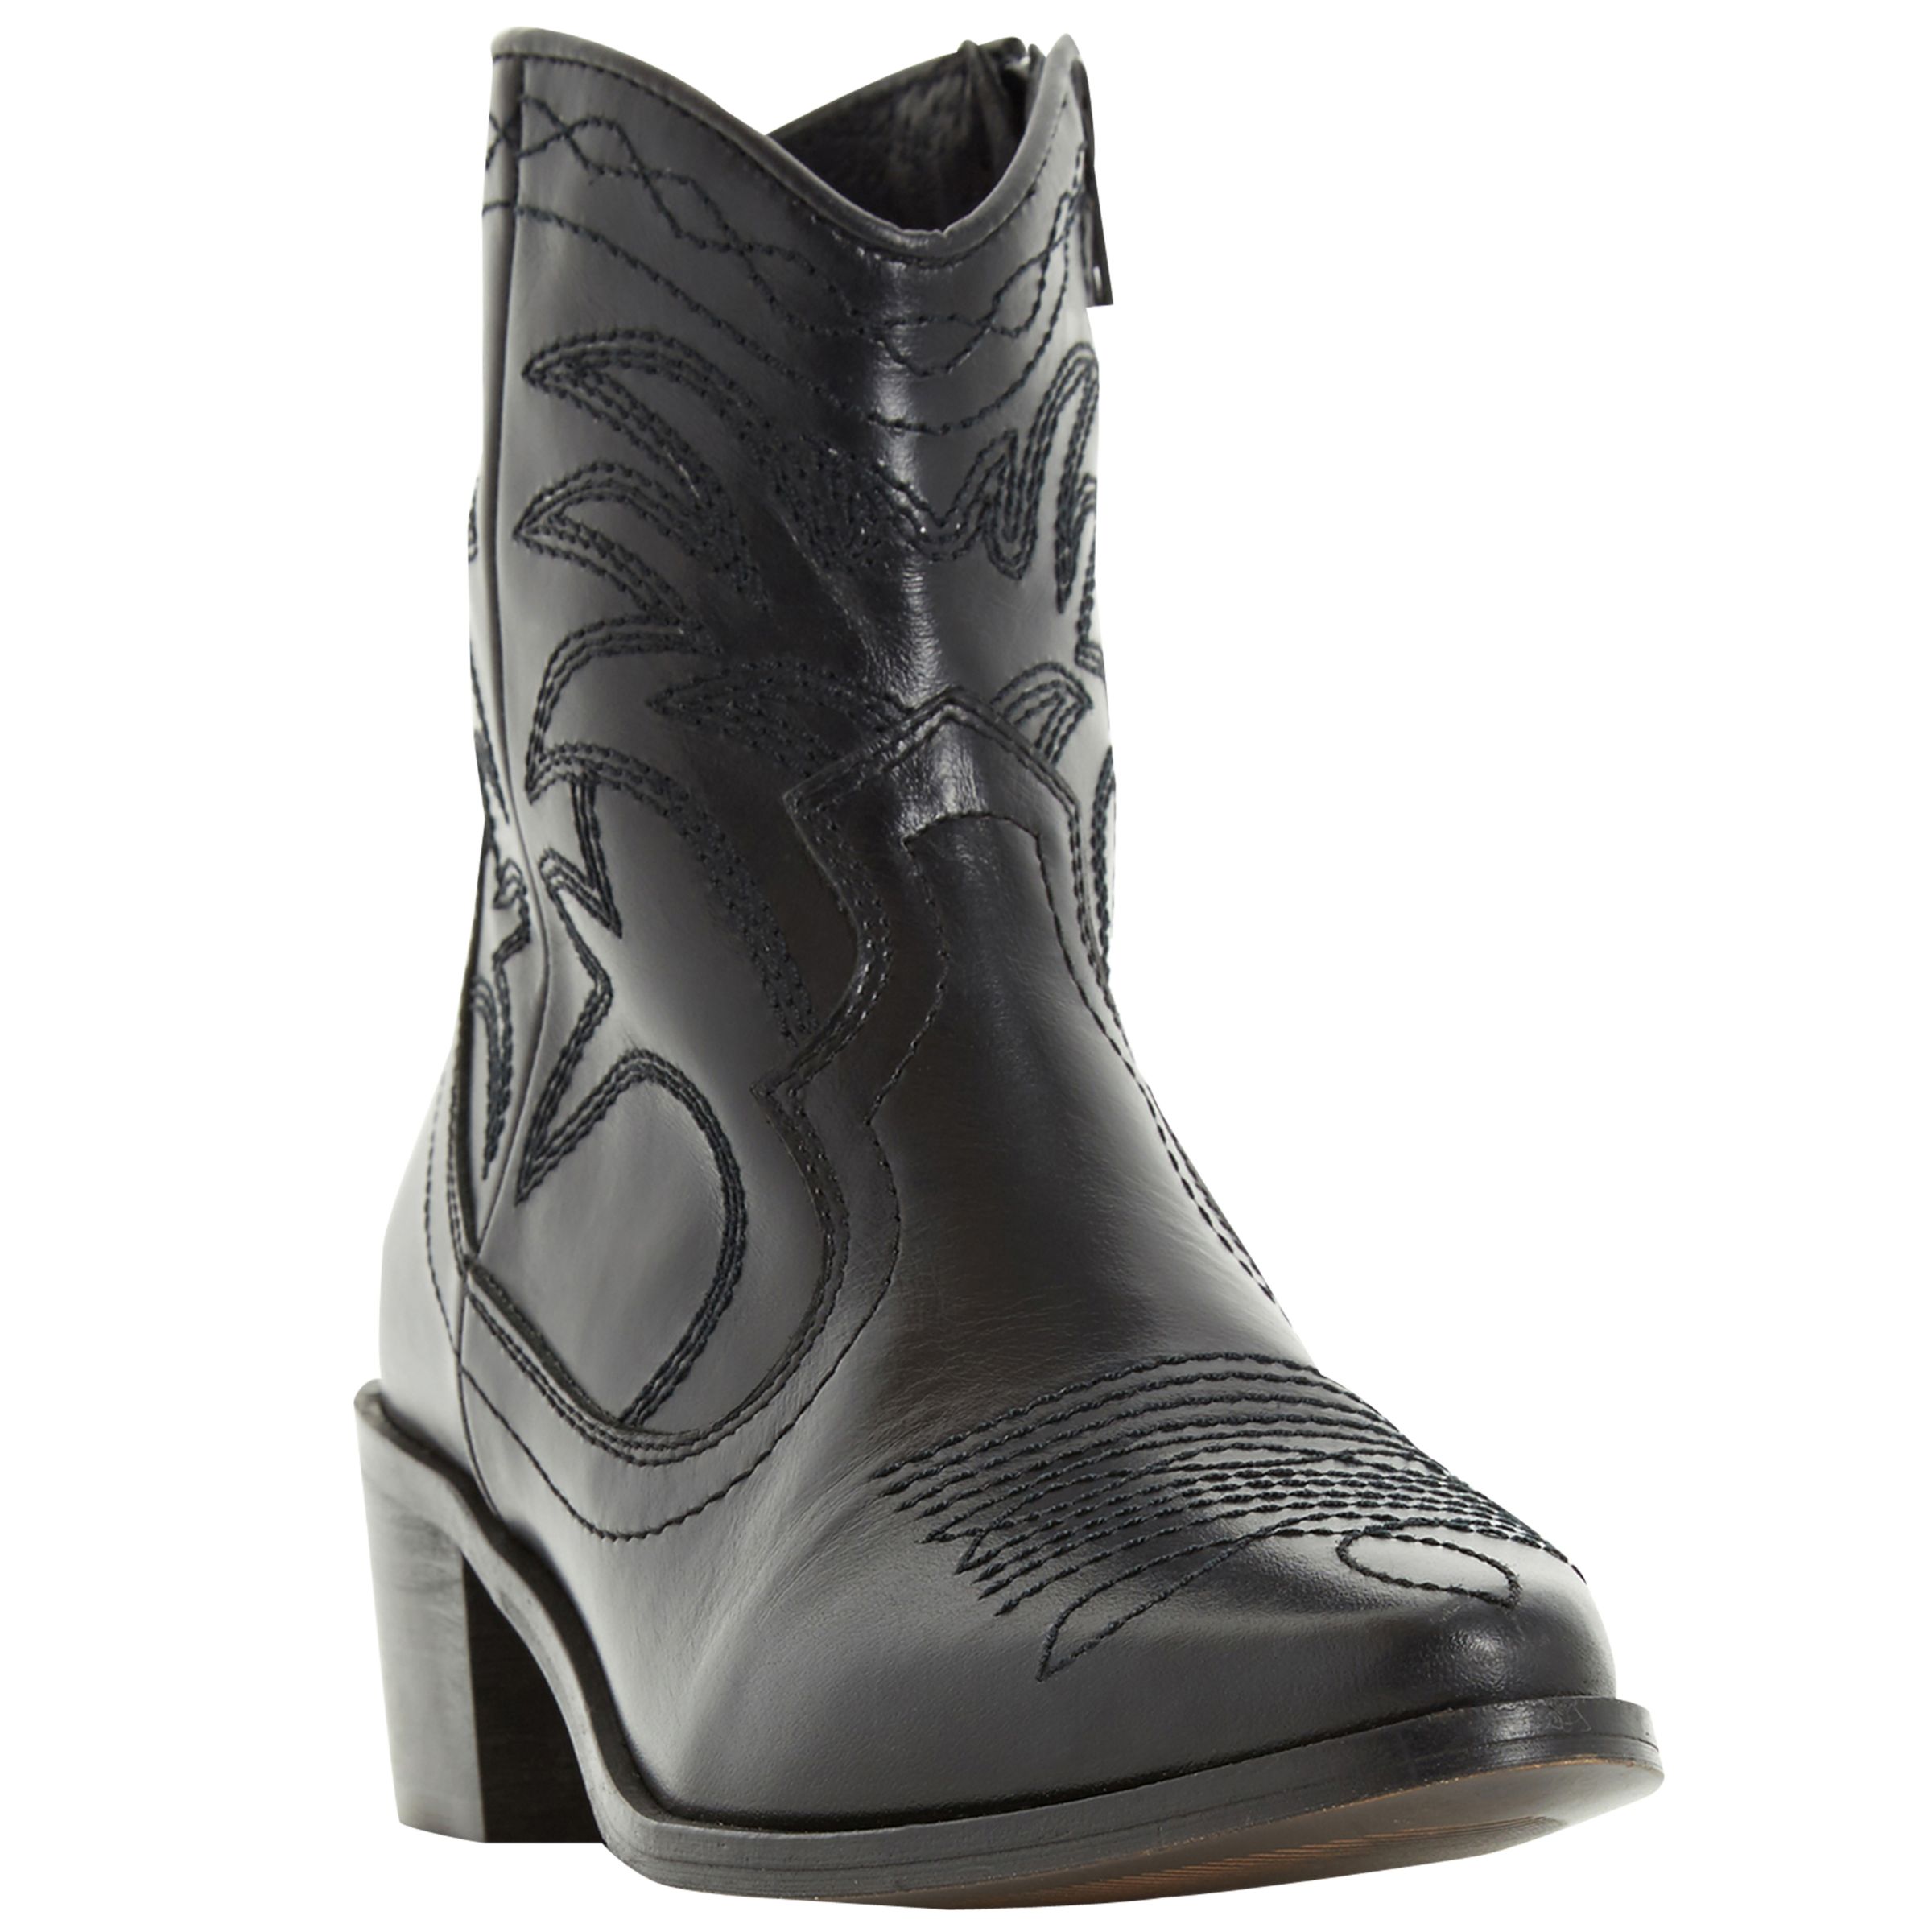 dune western boots